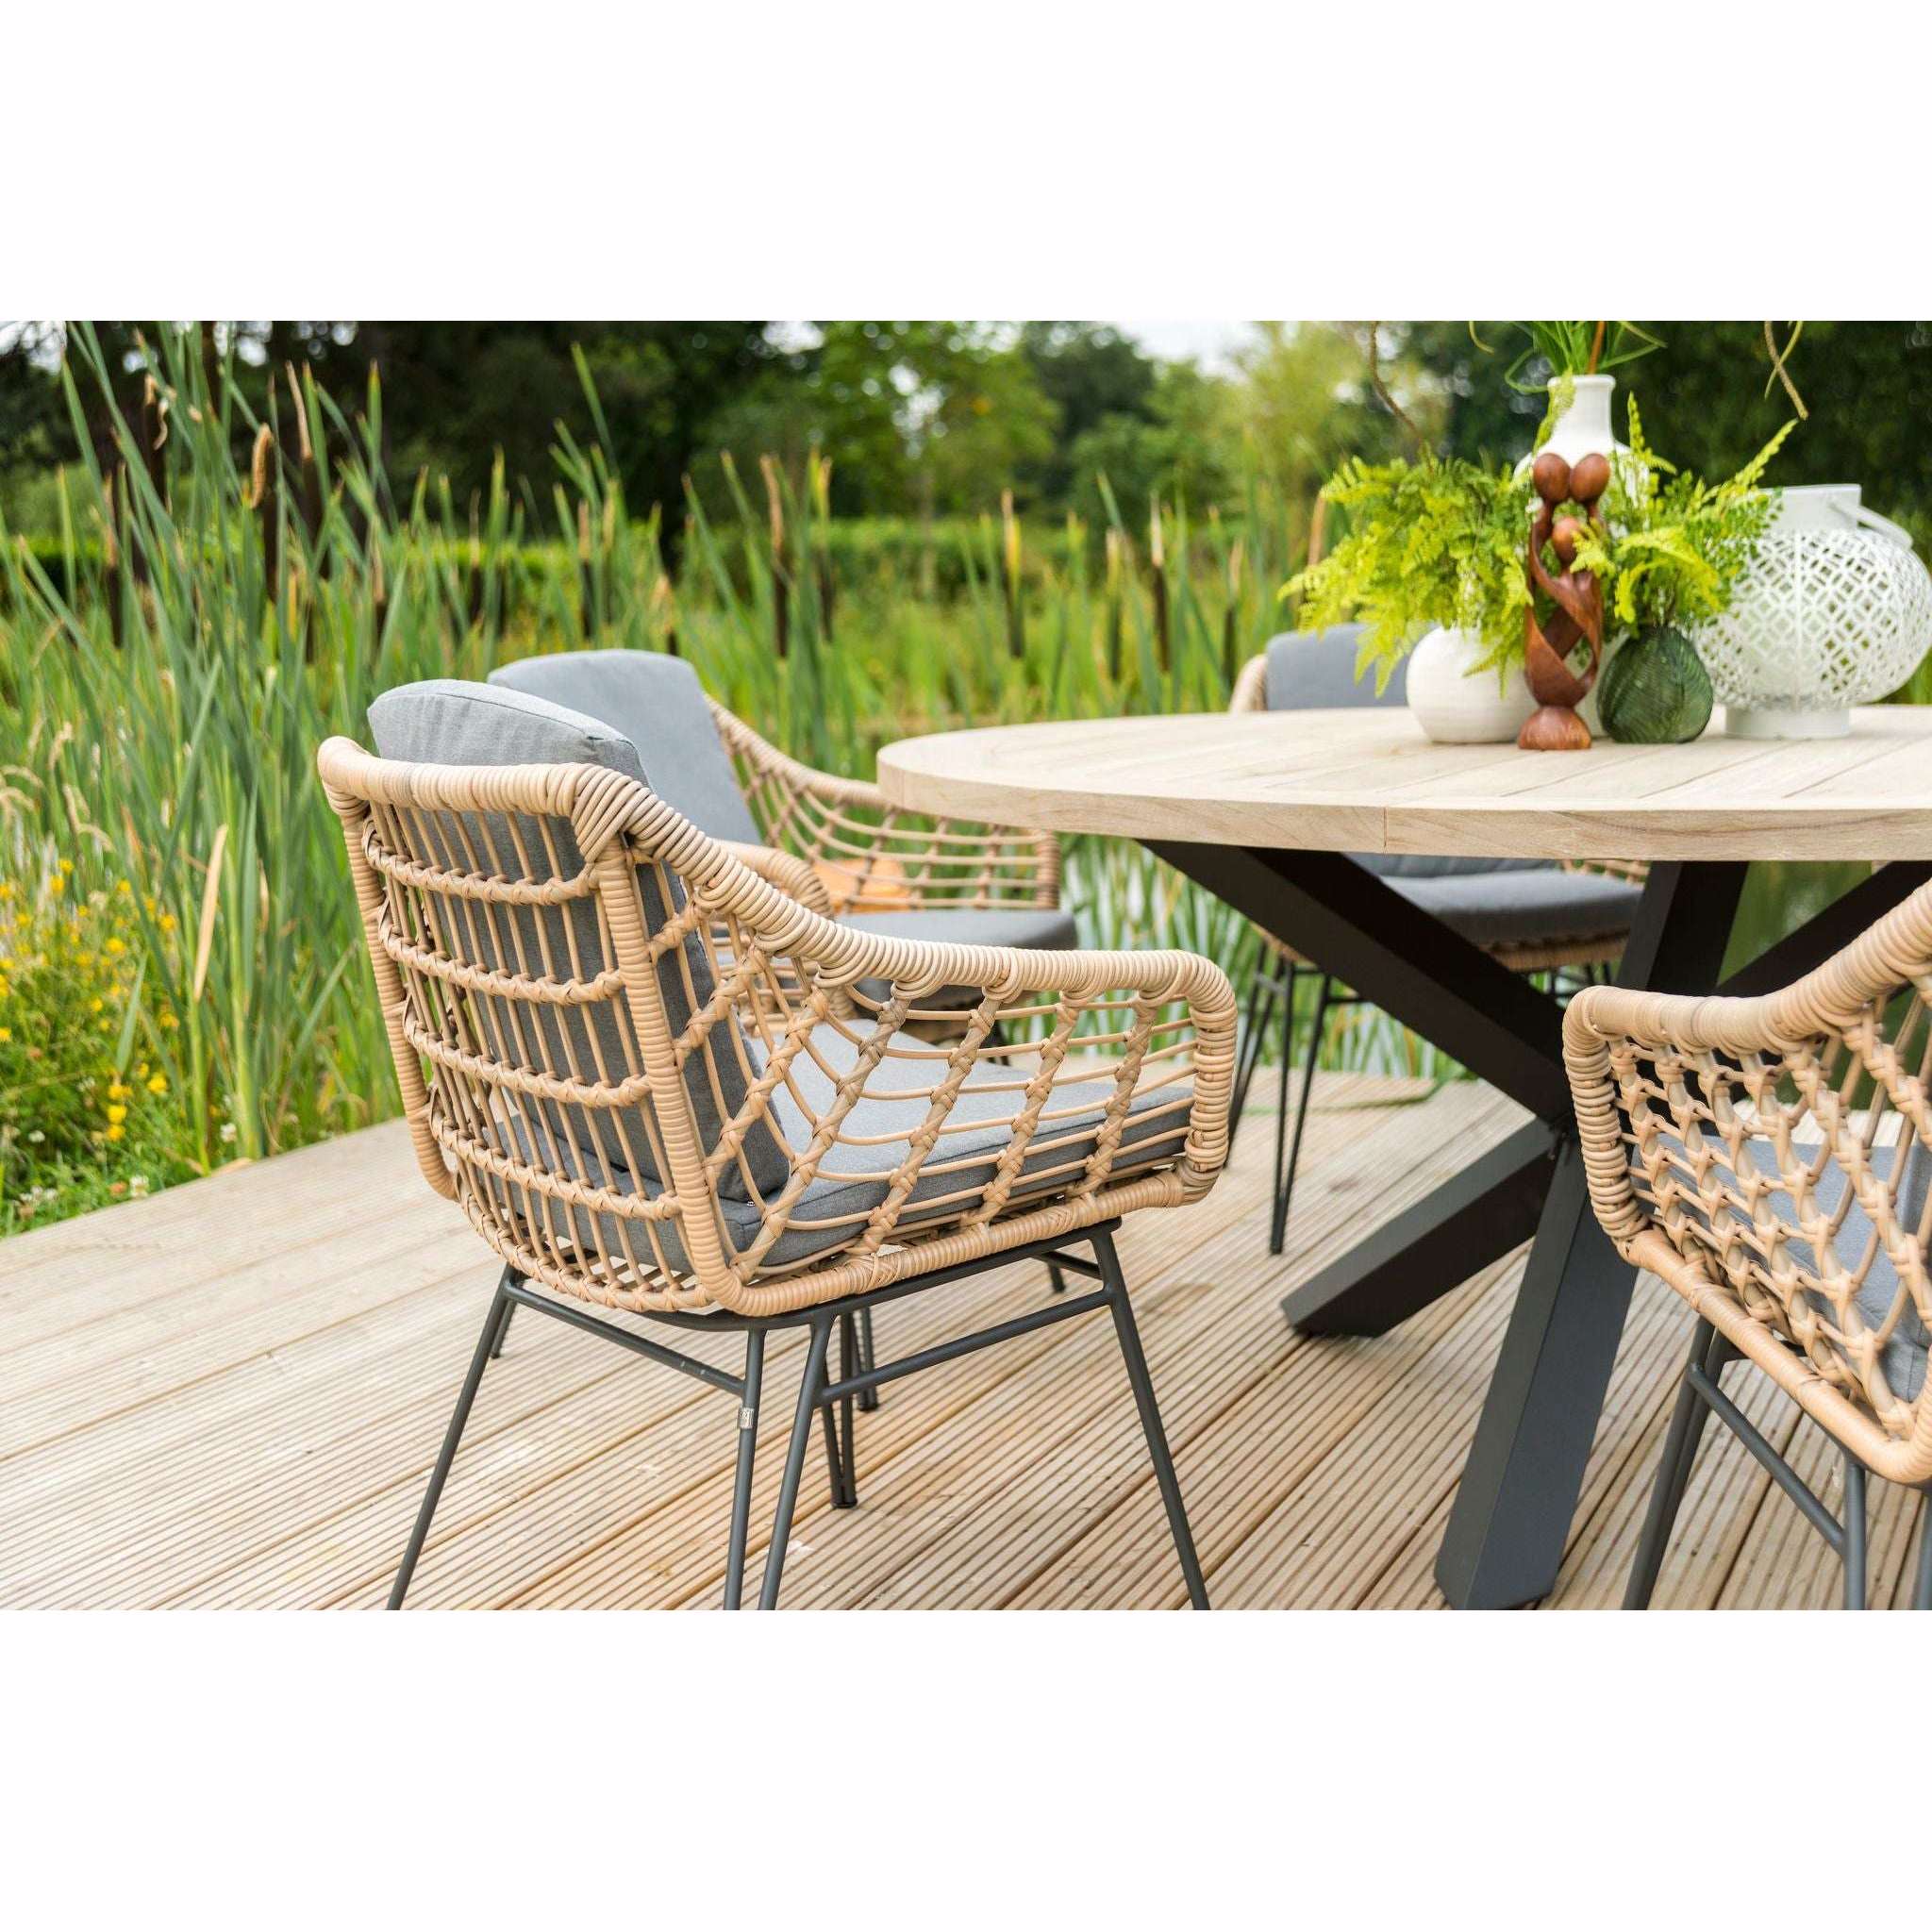 Exceptional Garden:4 Seasons Outdoor Cottage Hara 6 seater Dining set with Round Louvre Teak Dining Table